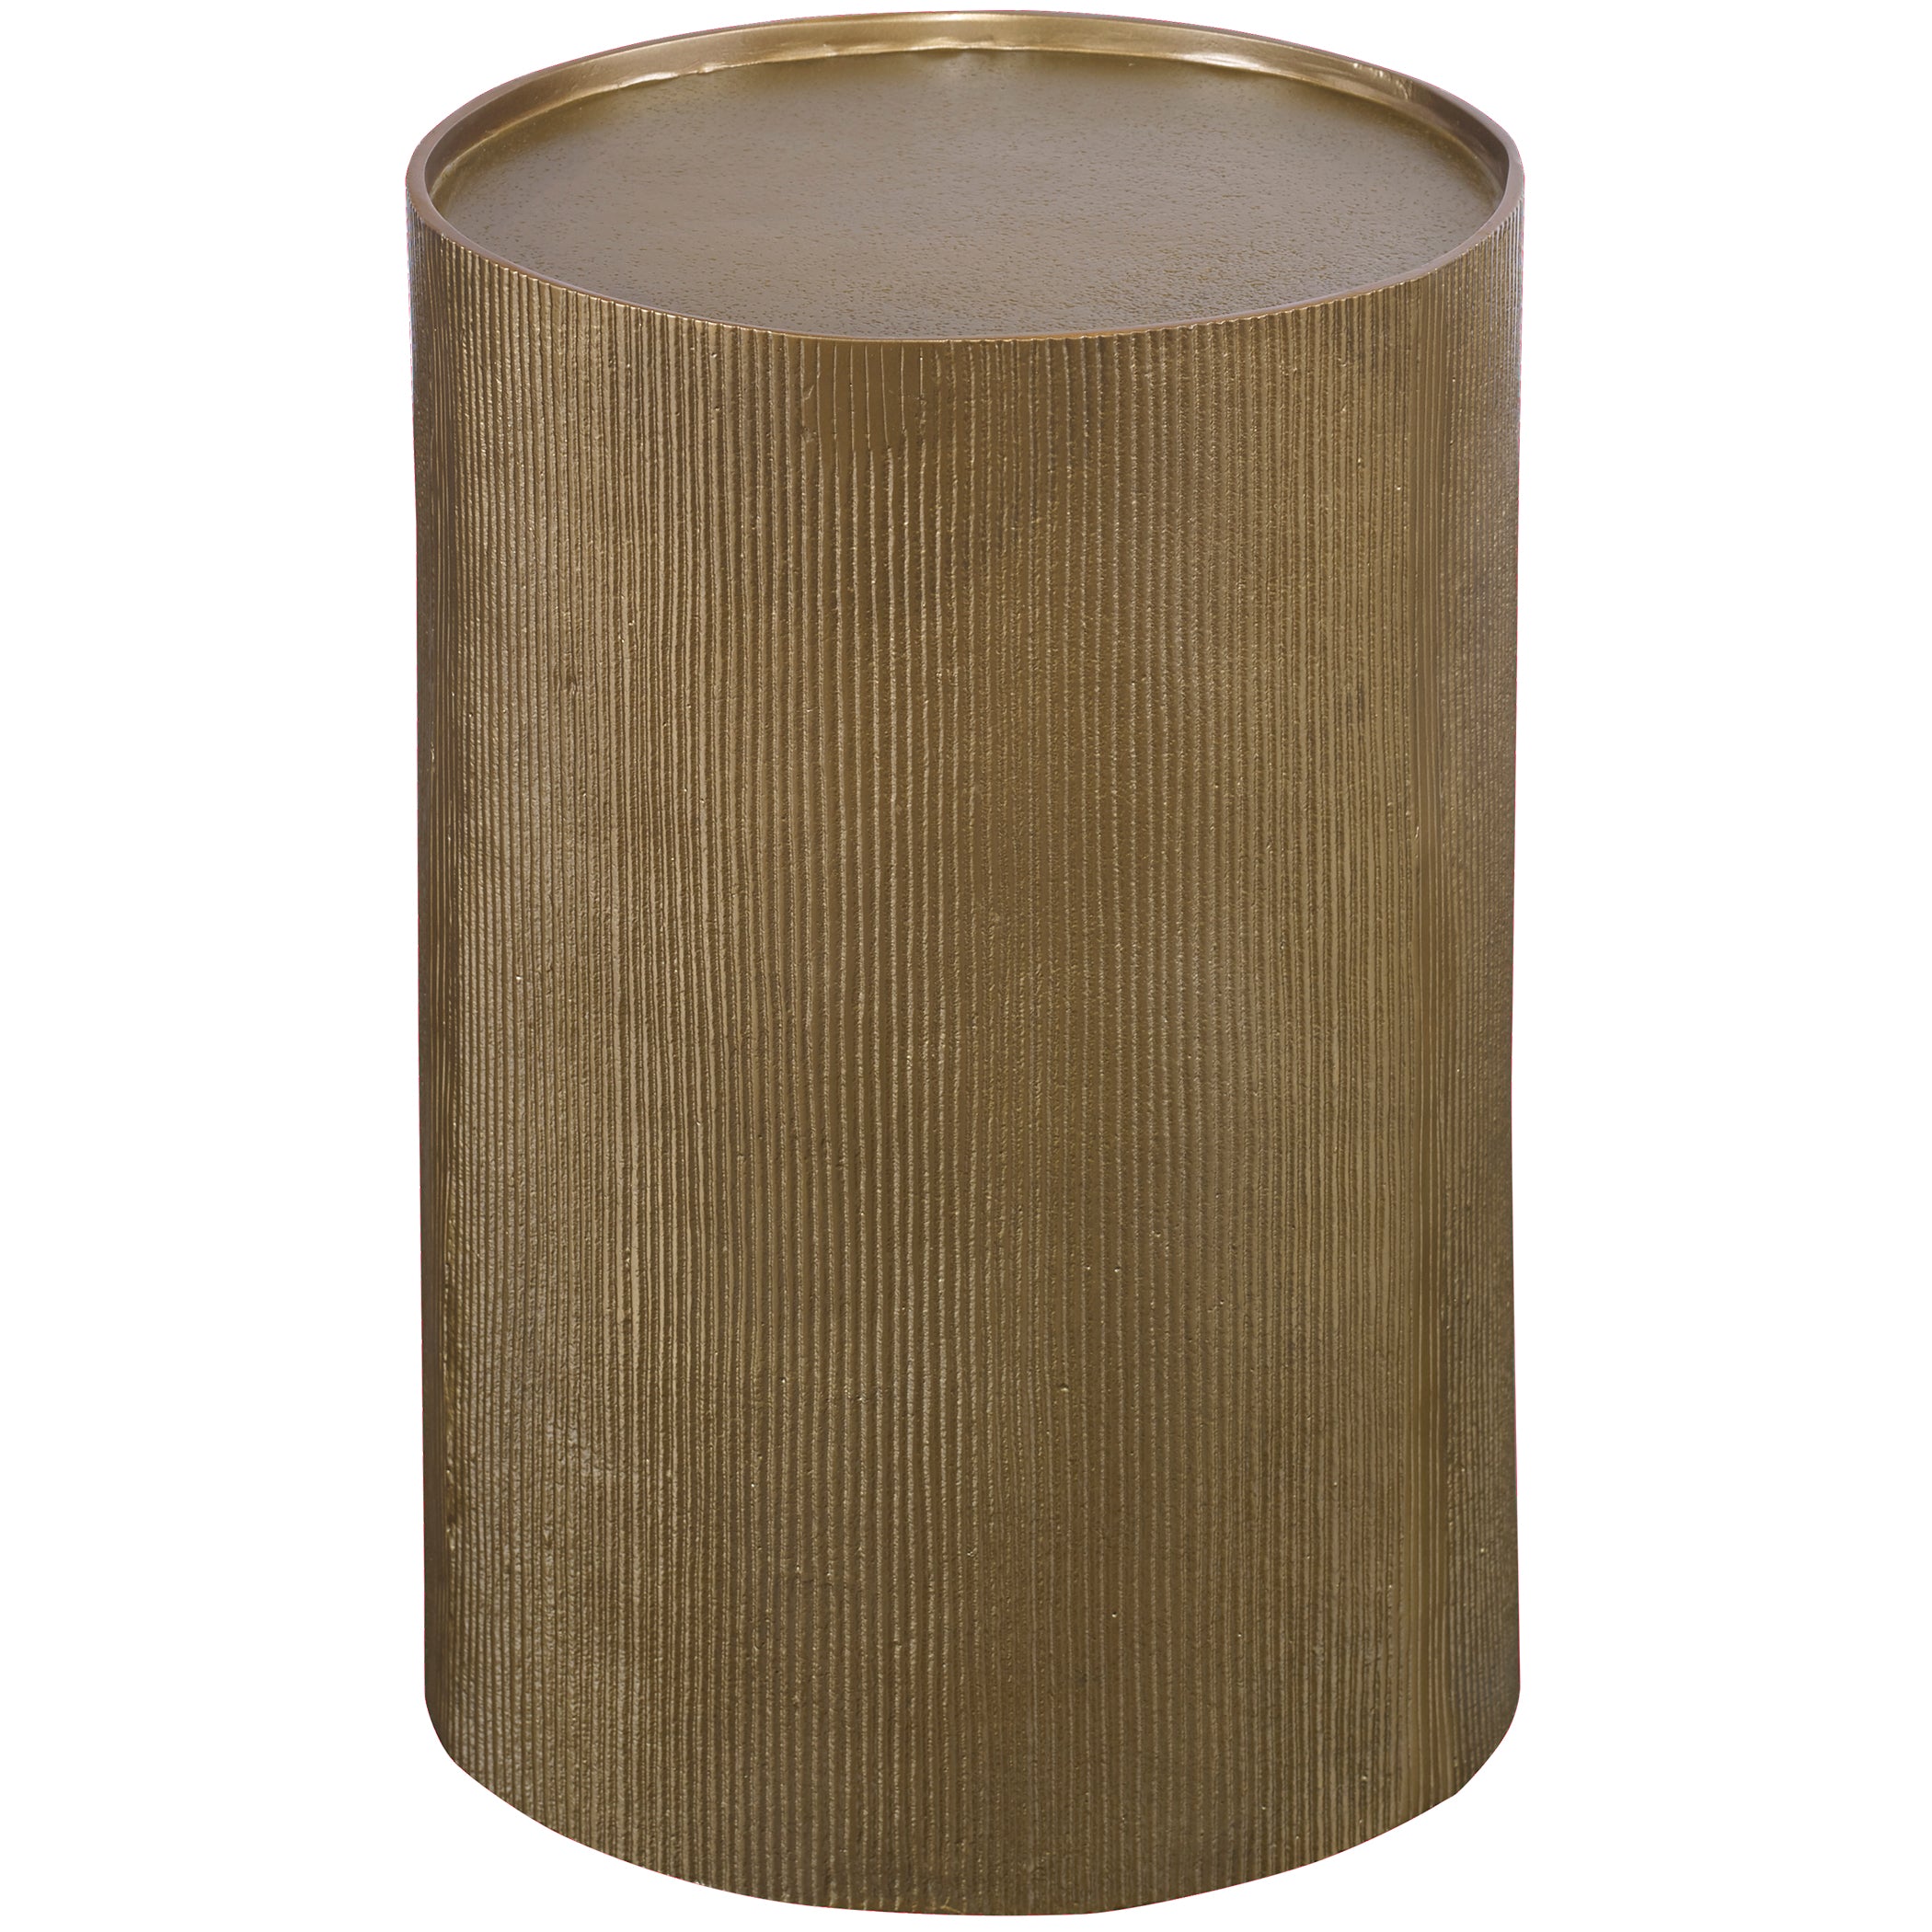 Uttermost Adrina Accent & End Tables Accent & End Tables Uttermost   